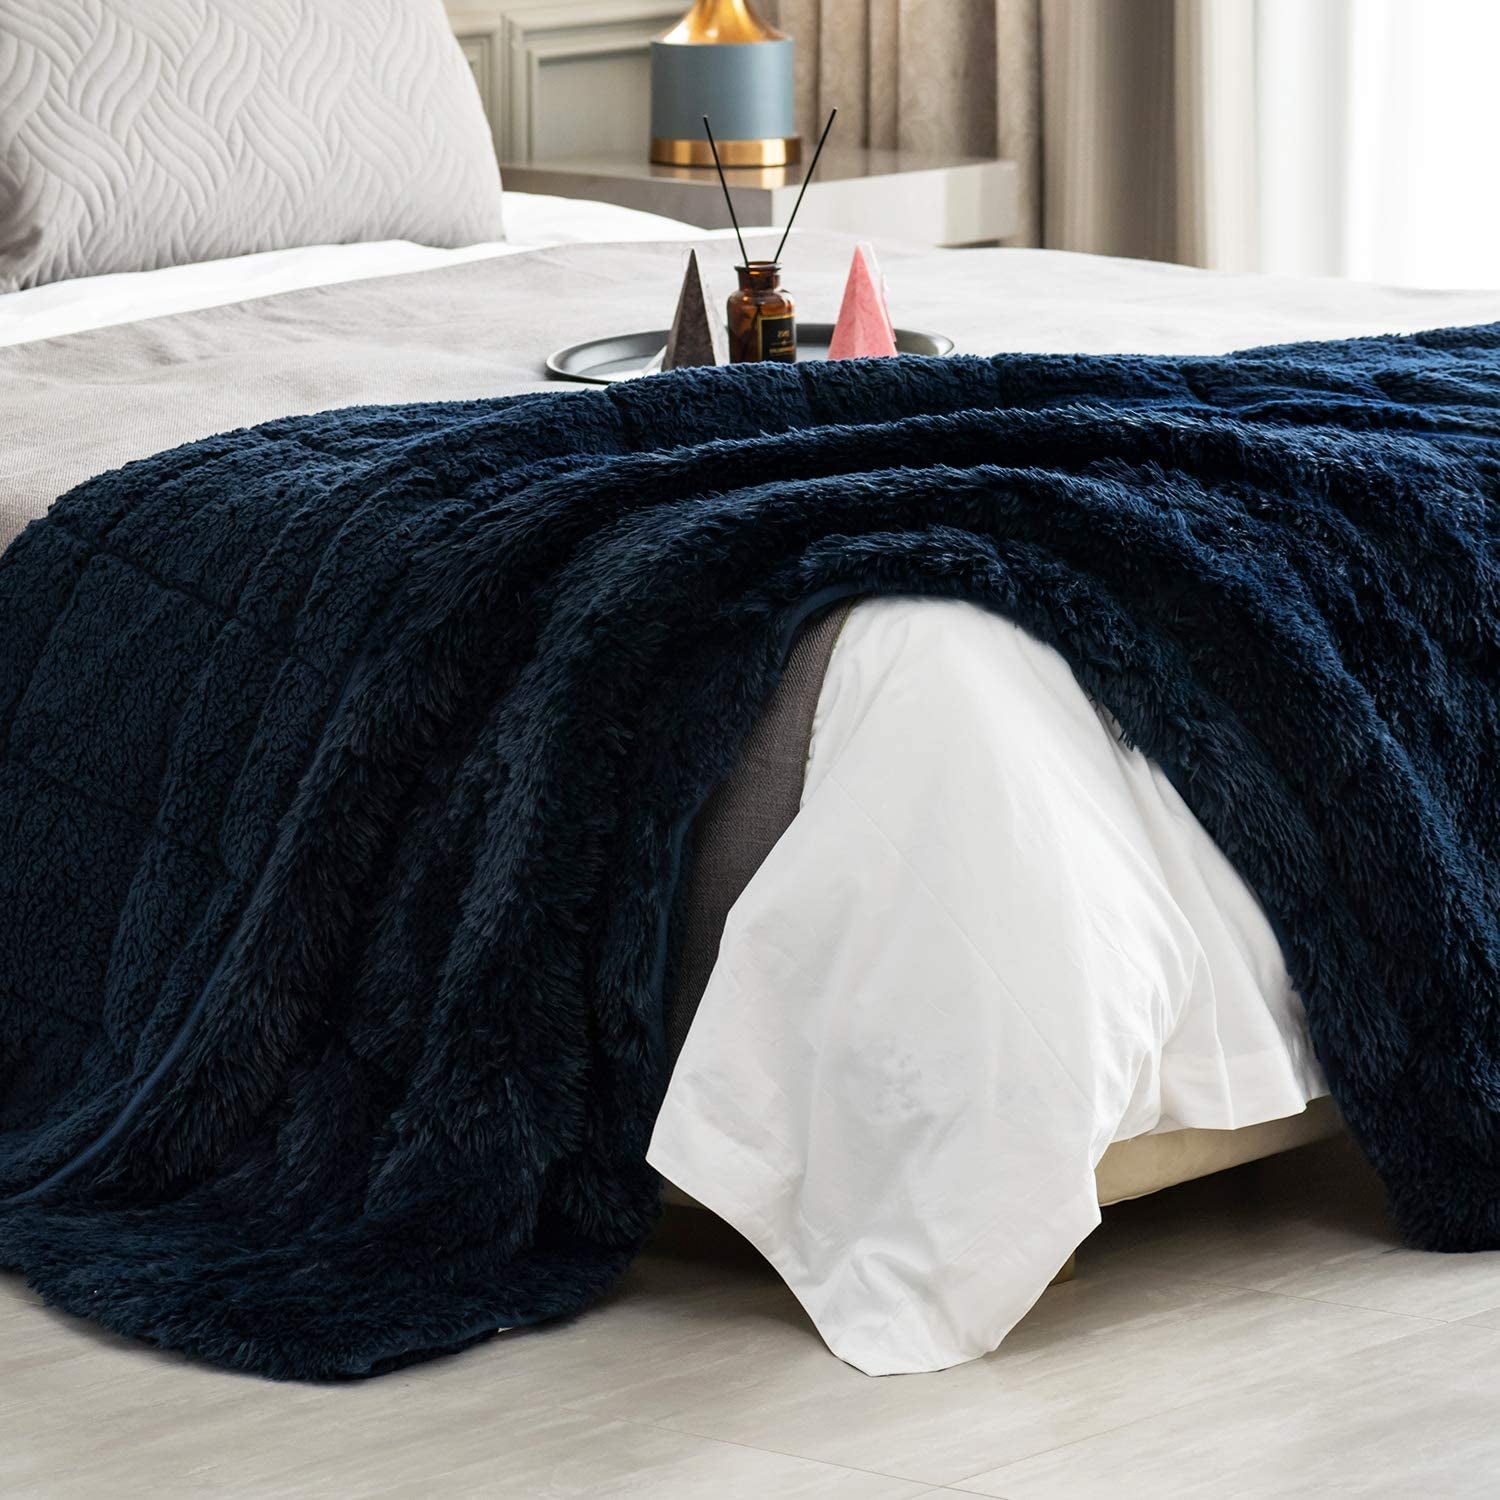 the navy blue blanket laying on a bed